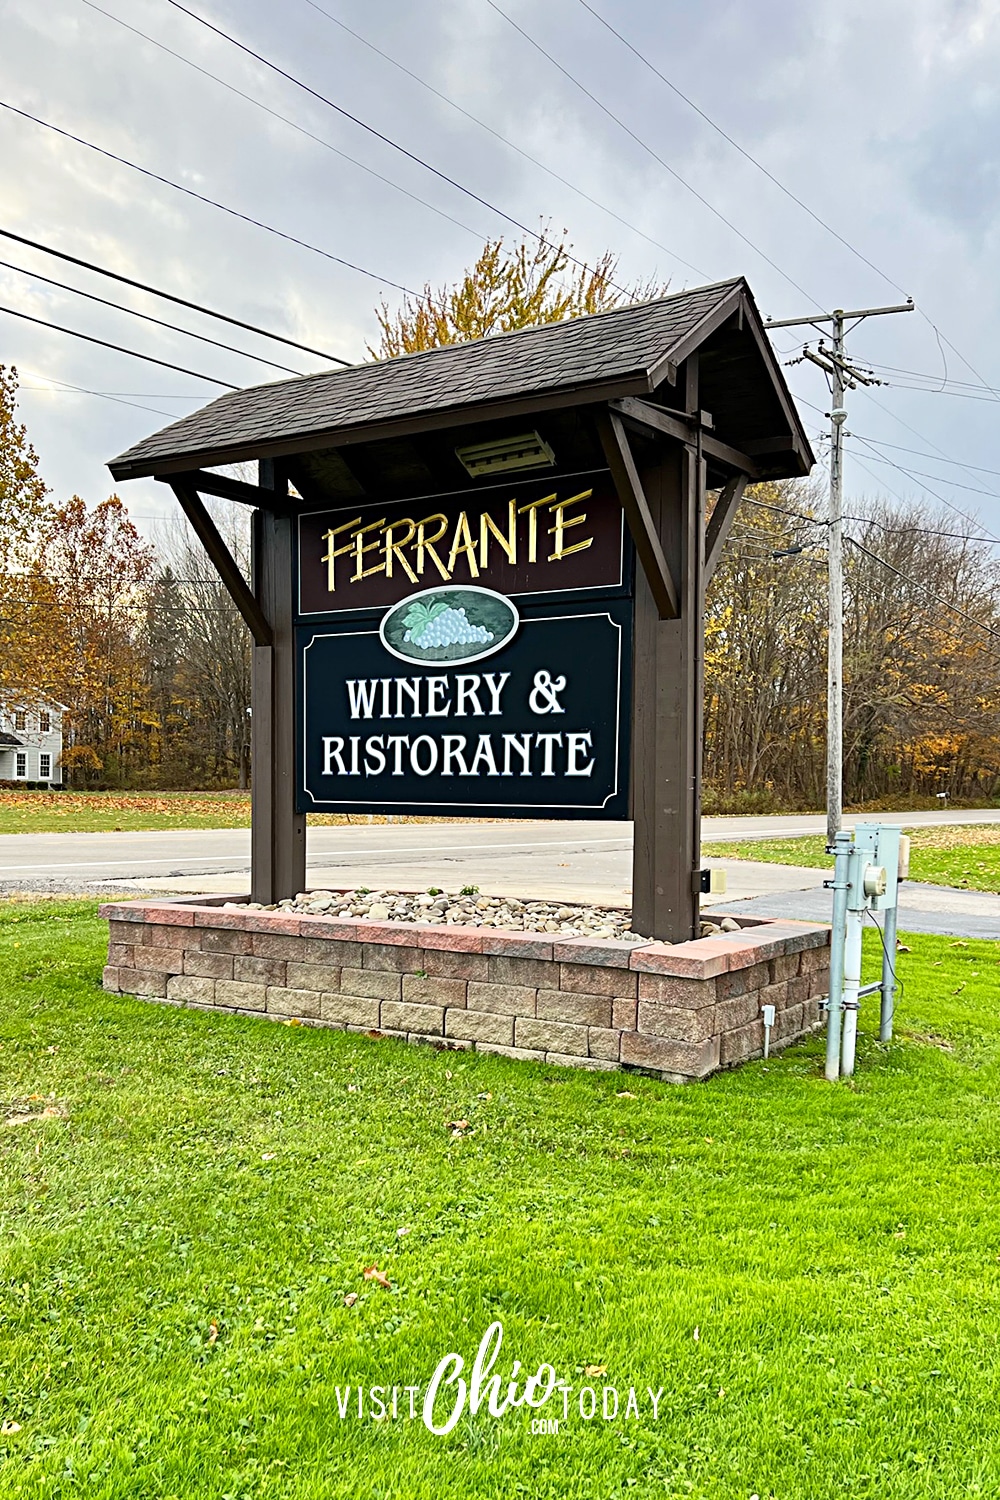 vertical photo of the outside sign on the approach to Ferrante Winery. Photo credit: Cindy Gordon of VisitOhioToday.com